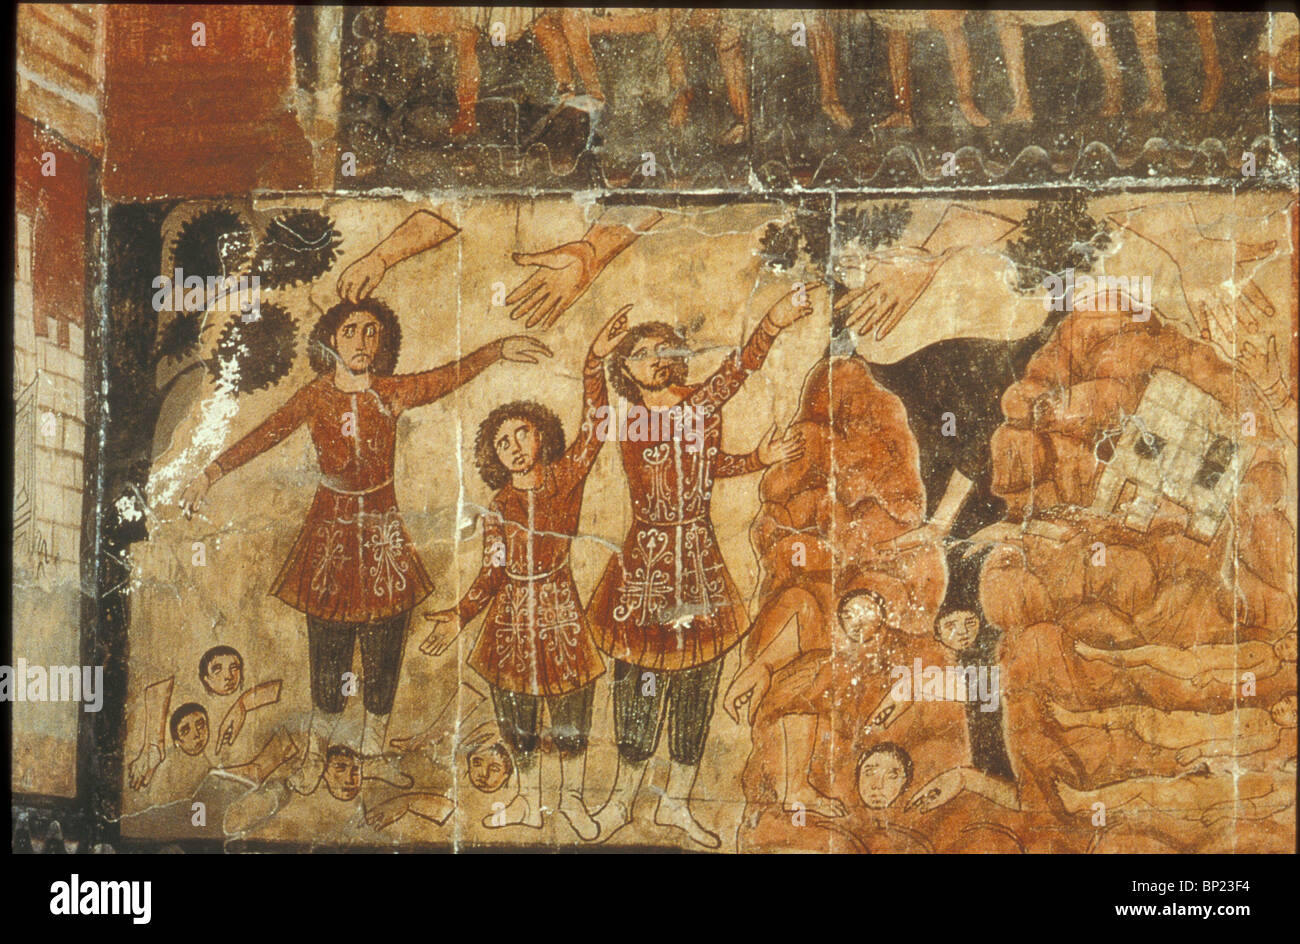 EZEKIEL'S PROPHECY ABOUT THE DESTRUCTION & RESTORATION OF NATIONAL LIFE (CH. 37). WALL PAINTING FROM DURA EUROPOS ONE OF THE Stock Photo